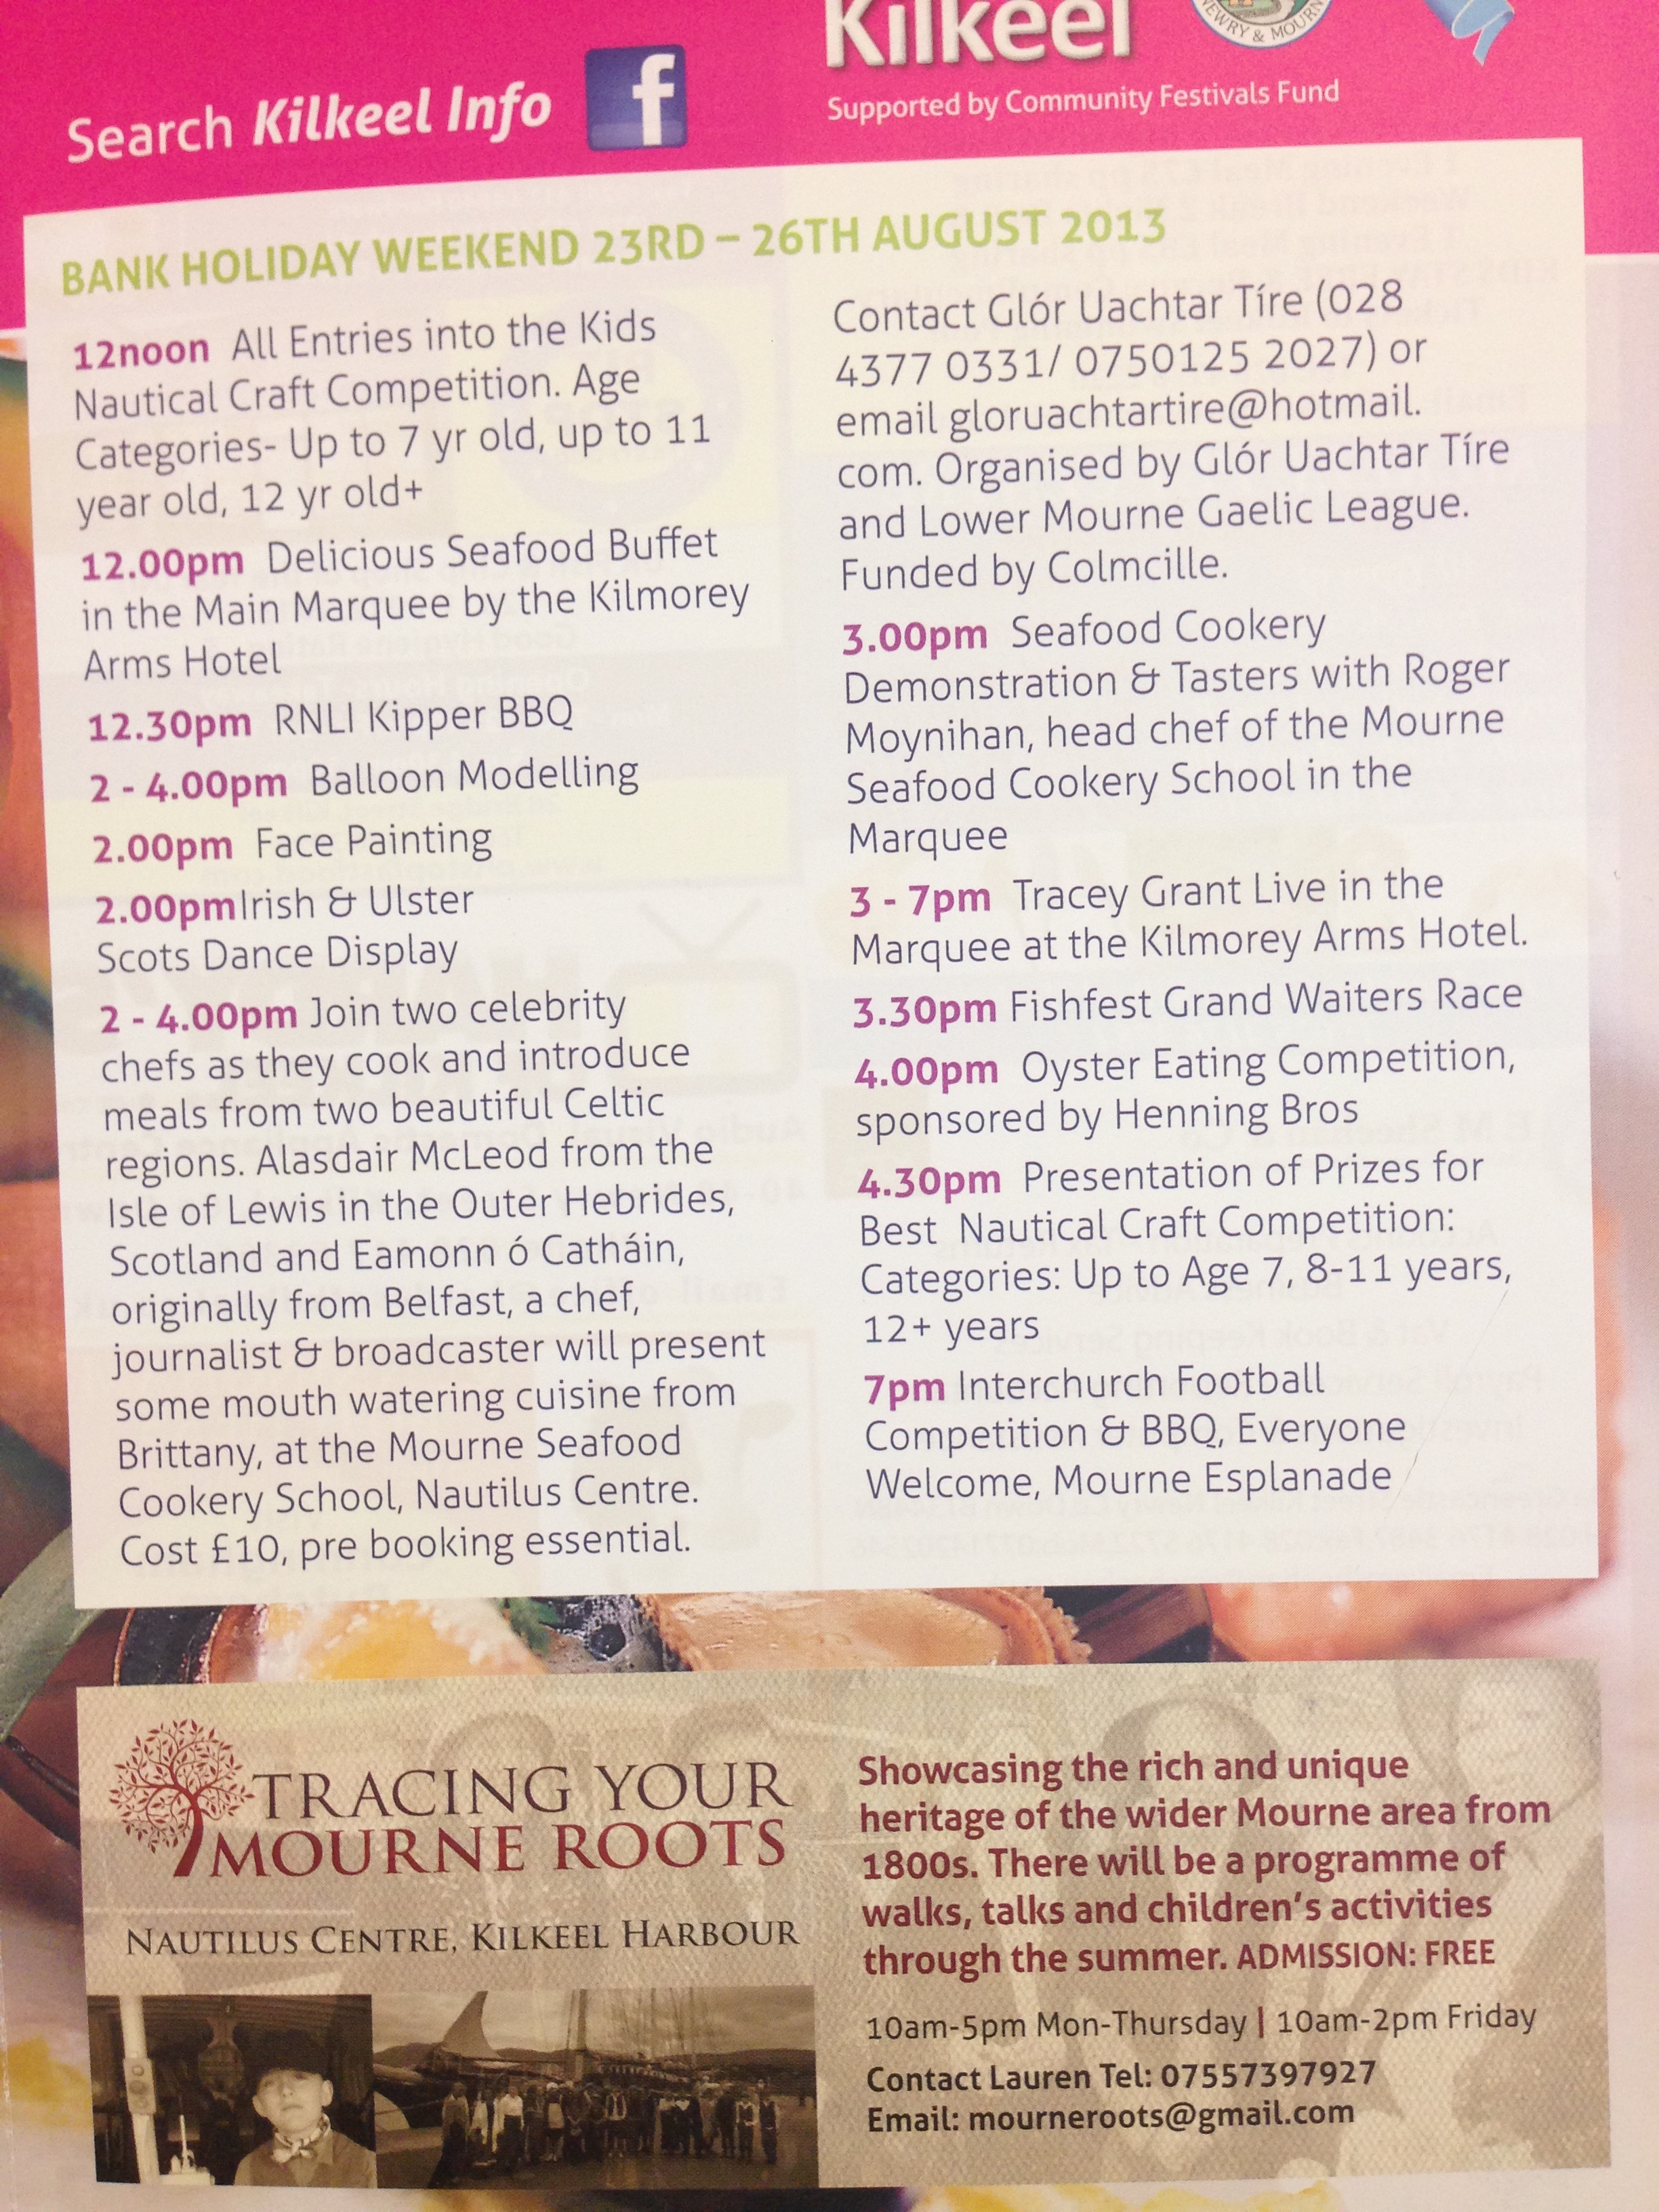 FishFest leaflet in which TYMR took part, August 2013